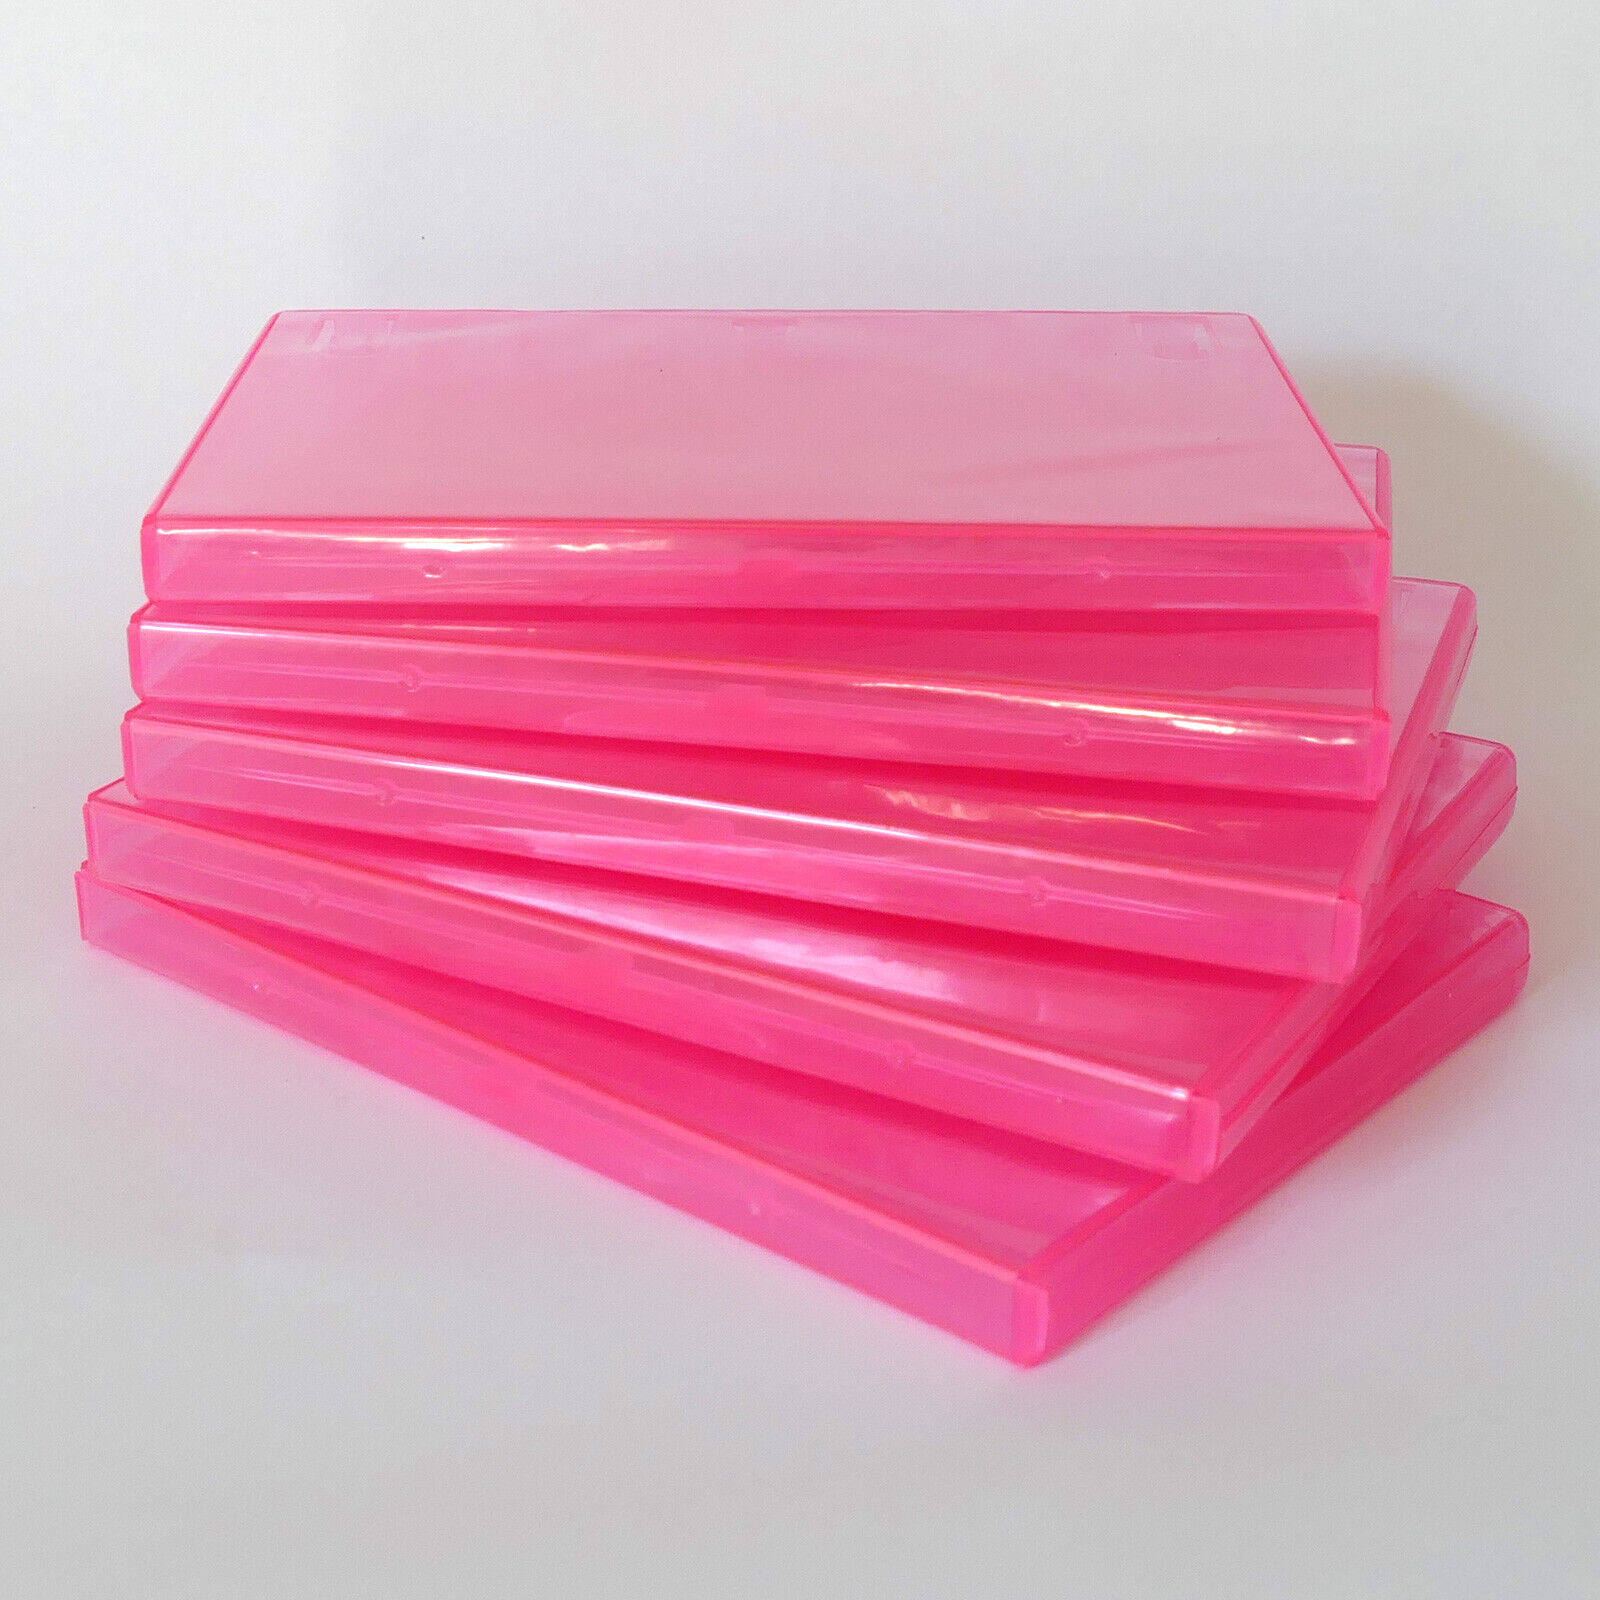 5 (FIVE) Clear PINK Single DVD Cases Standard 14mm Color Tinted Sleeve LOT NEW